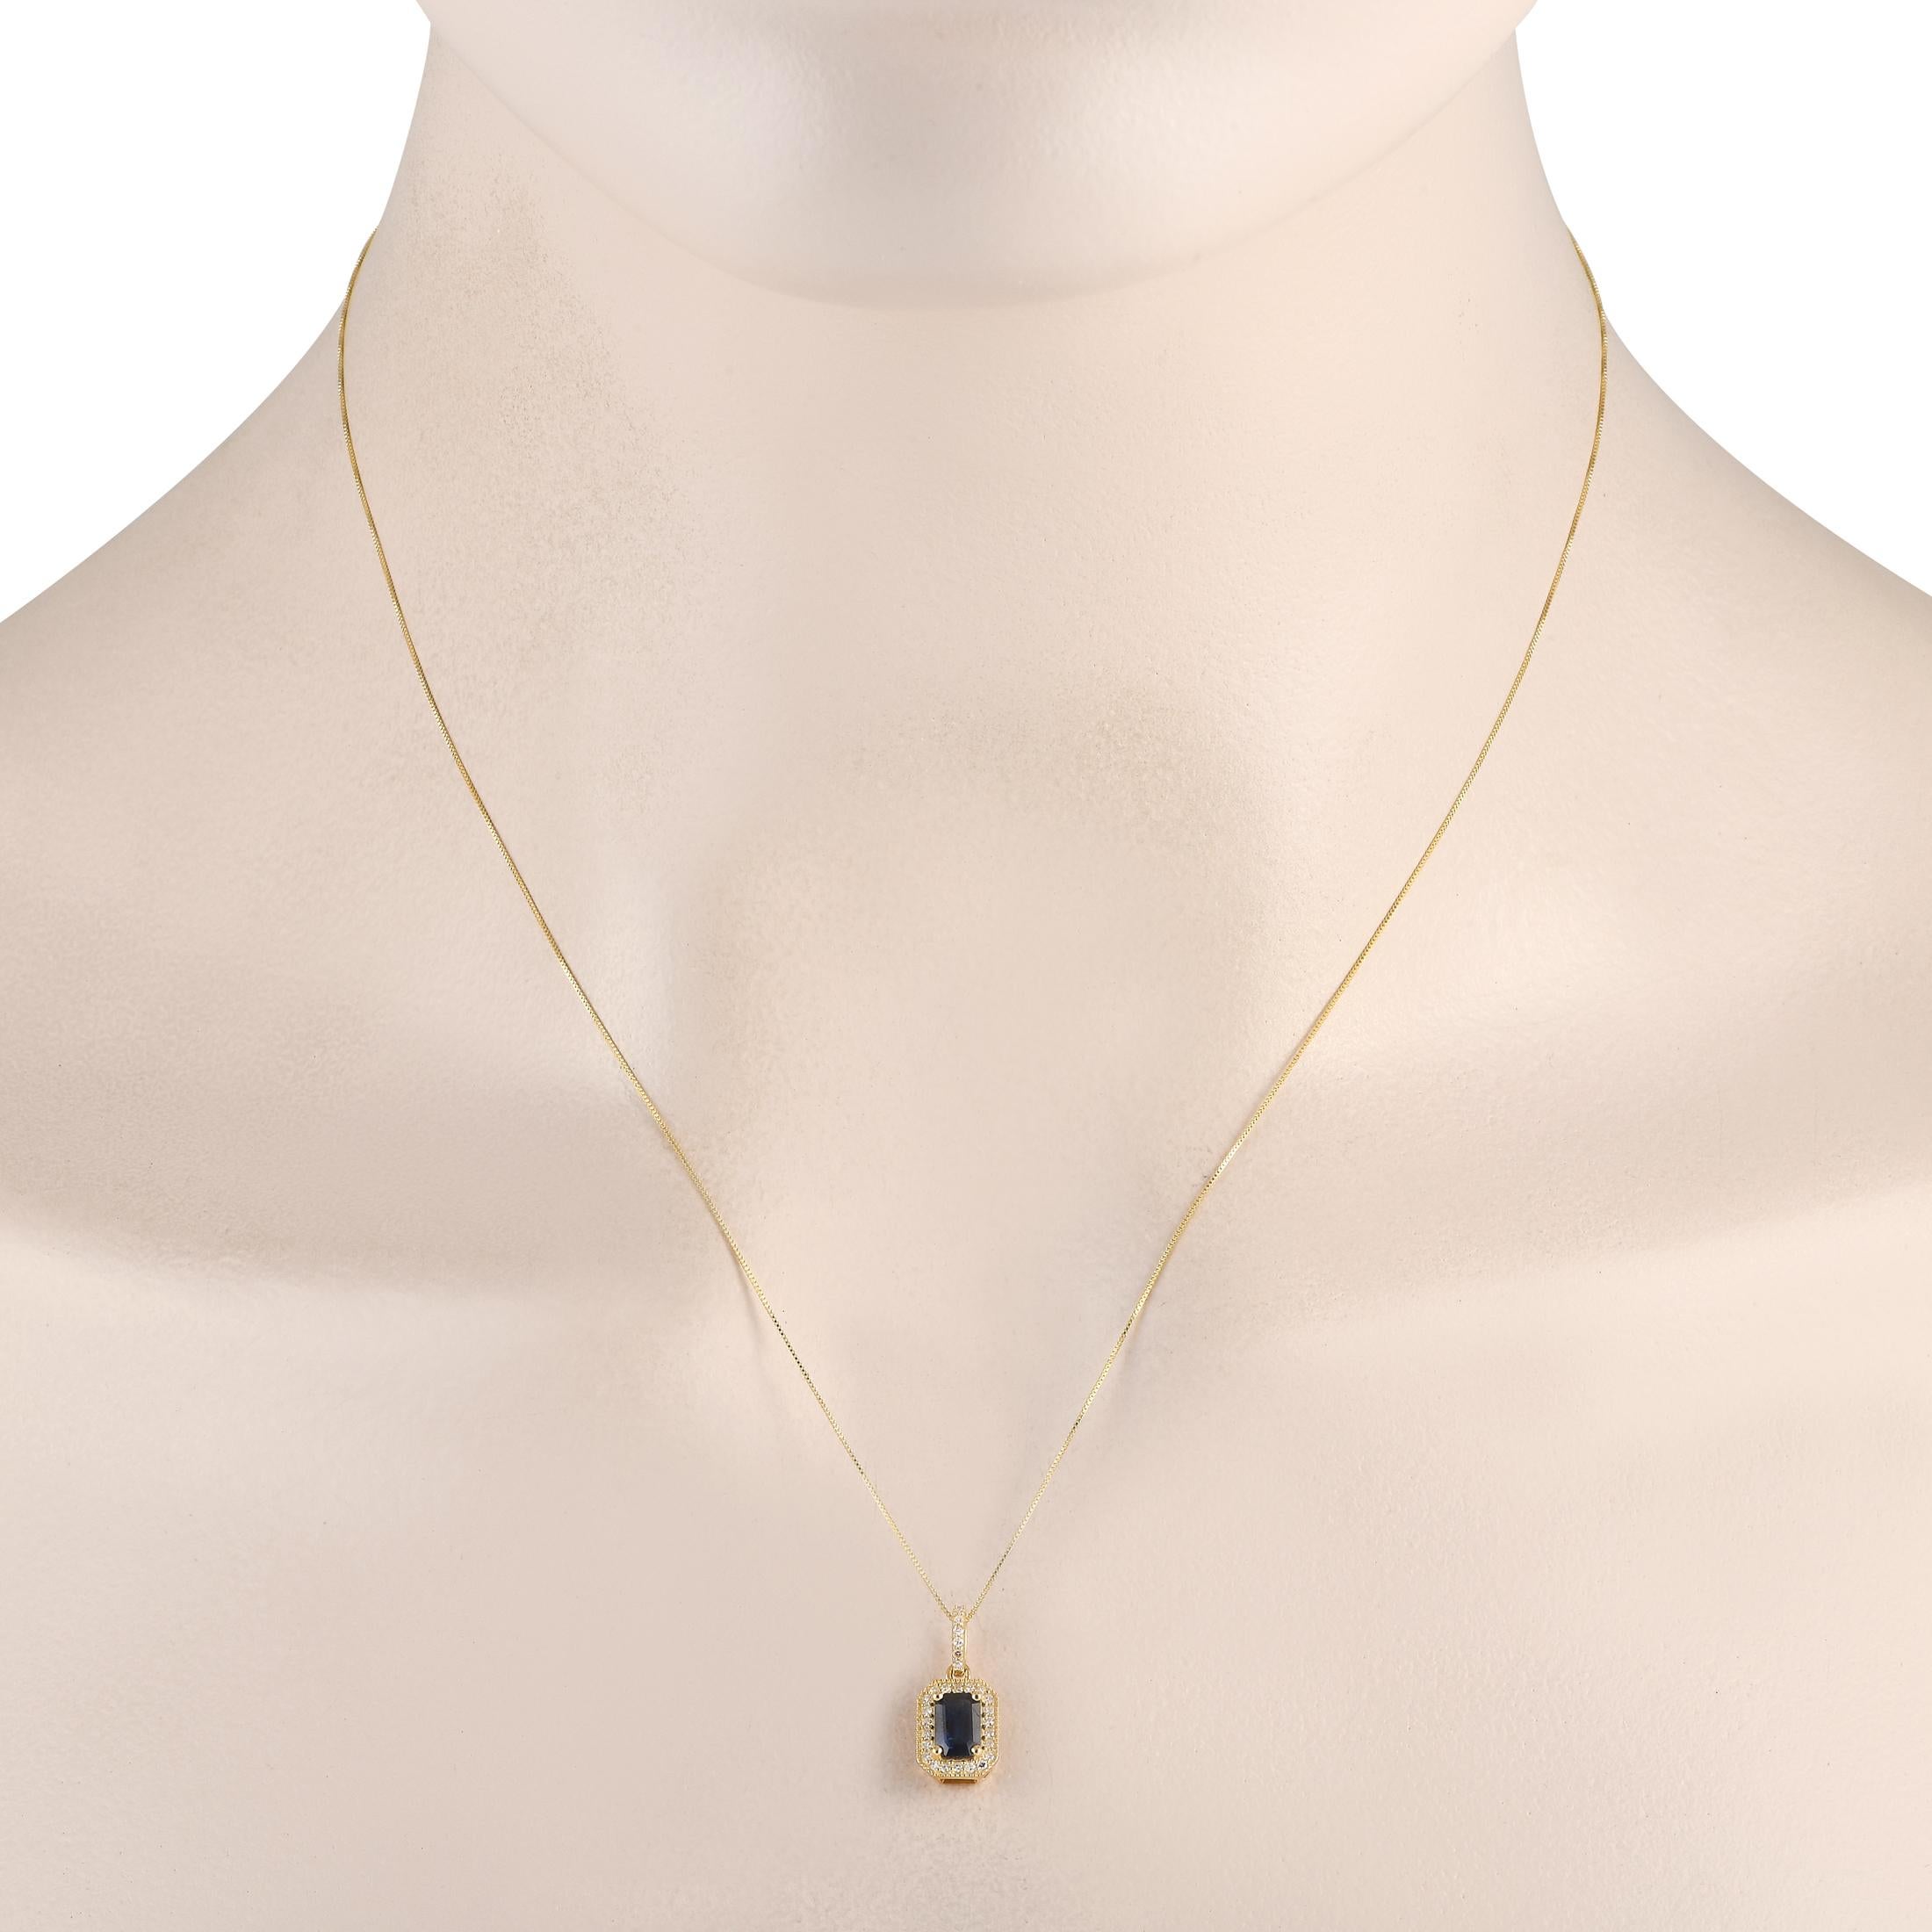 This timeless necklace will add a pop of color to any ensemble. Suspended from an 18 chain, an opulent 14K Yellow Gold pendant measures 0.65 long by 0.25 wide. Its elevated by a captivating Sapphire center stone and Diamond accents totaling 0.10